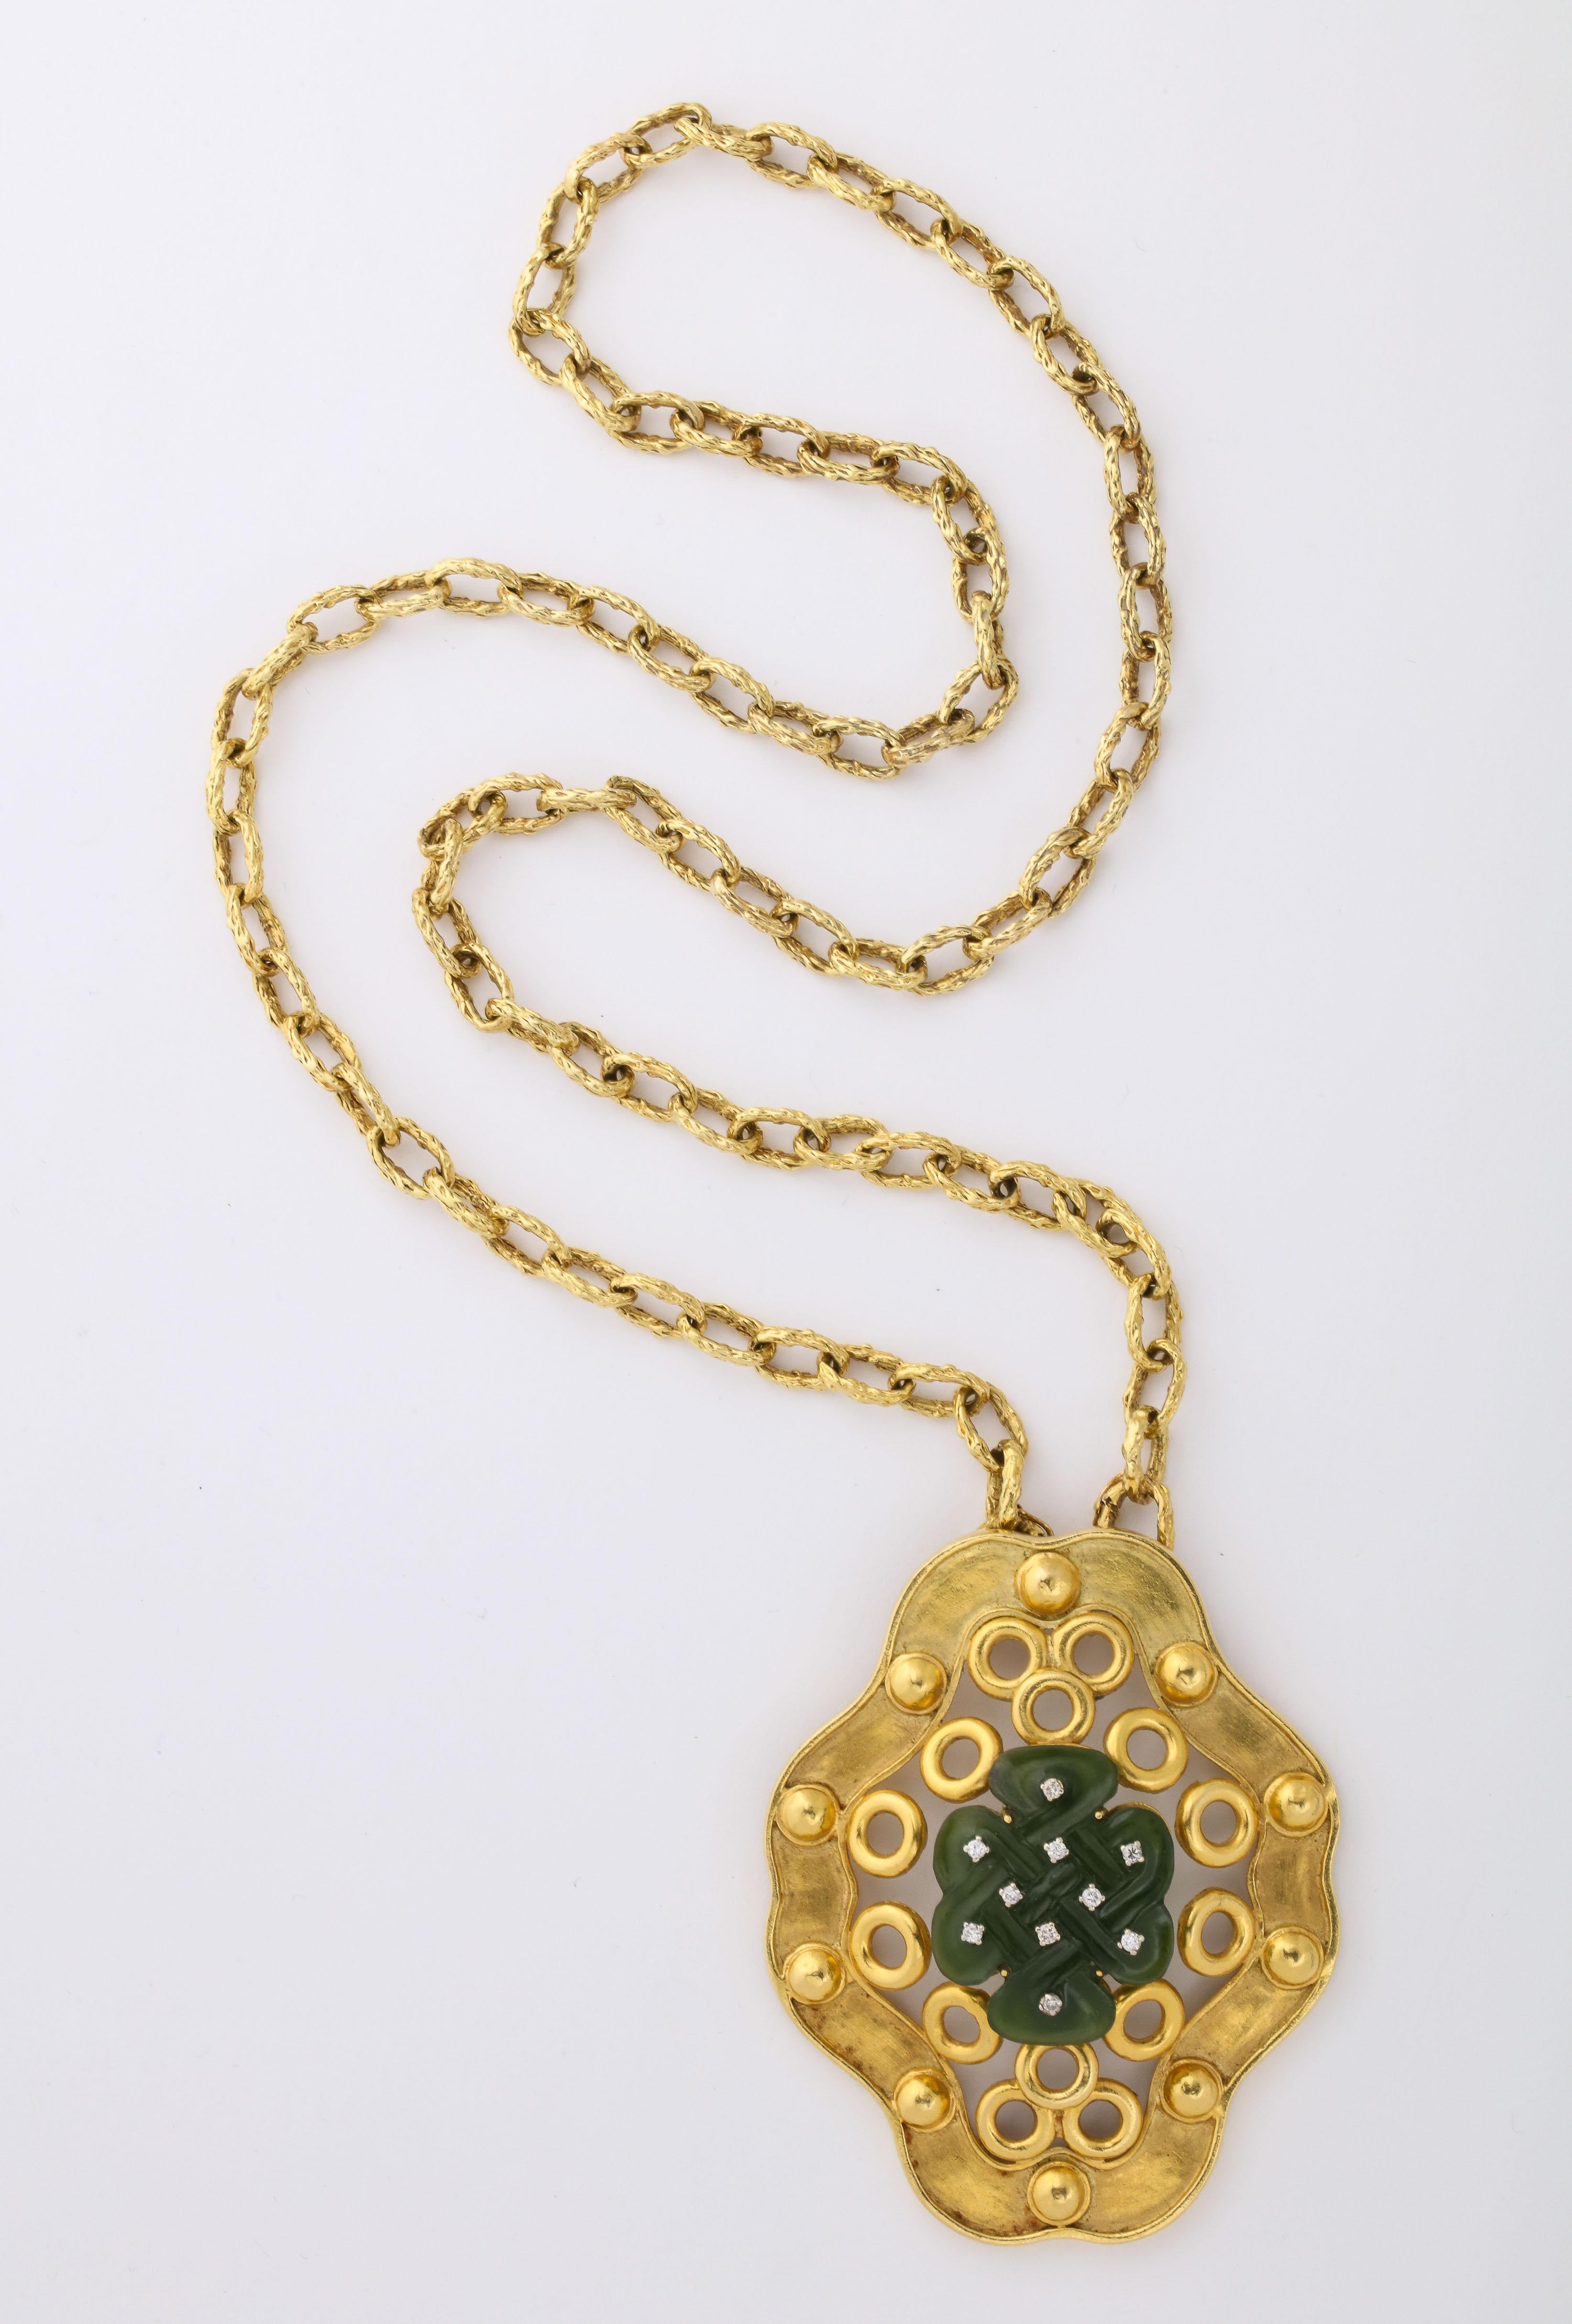 Italian Oversize Pendant with Hand Carved Chinese Nephrite Infinity Chain set with 10 full cut clean white Diamonds - Approximately 10pt. total and hanging from a Removable 18kt Textured 28